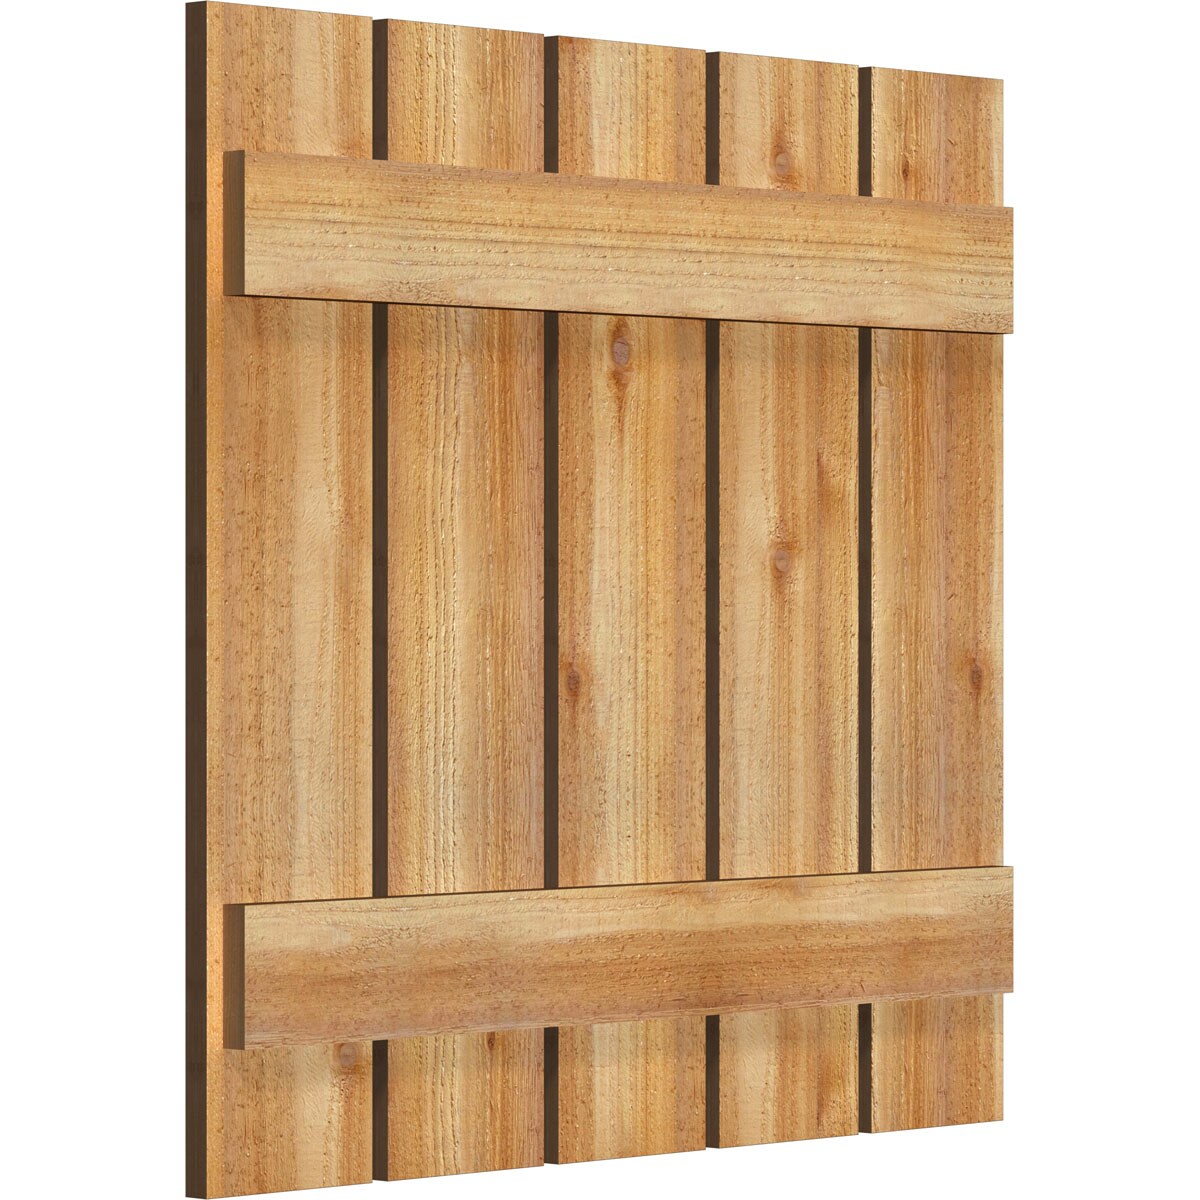 Ekena Millwork 2-Pack 28.875-in W x 28-in H Unfinished Board and Batten Spaced Wood Western Red cedar Exterior Shutters